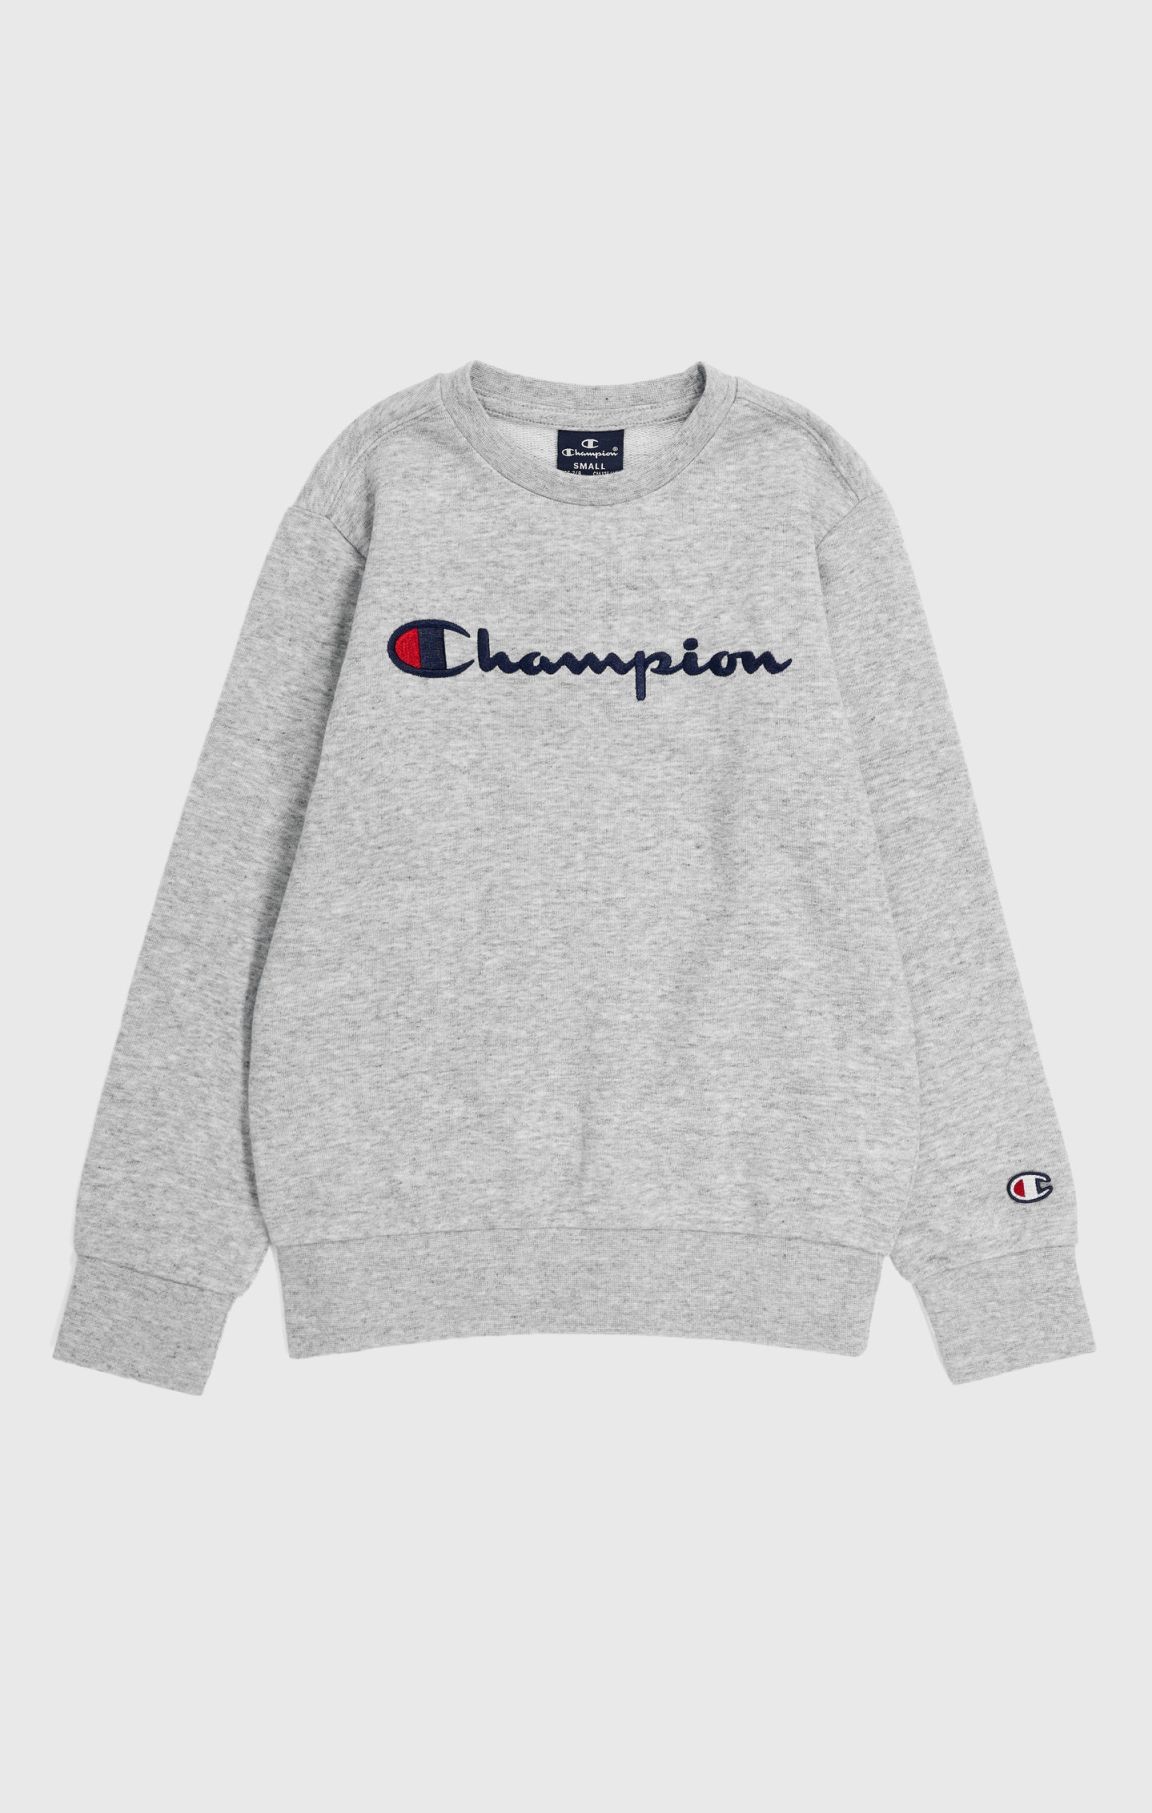 Boys Embroidered French Terry Sweatshirt